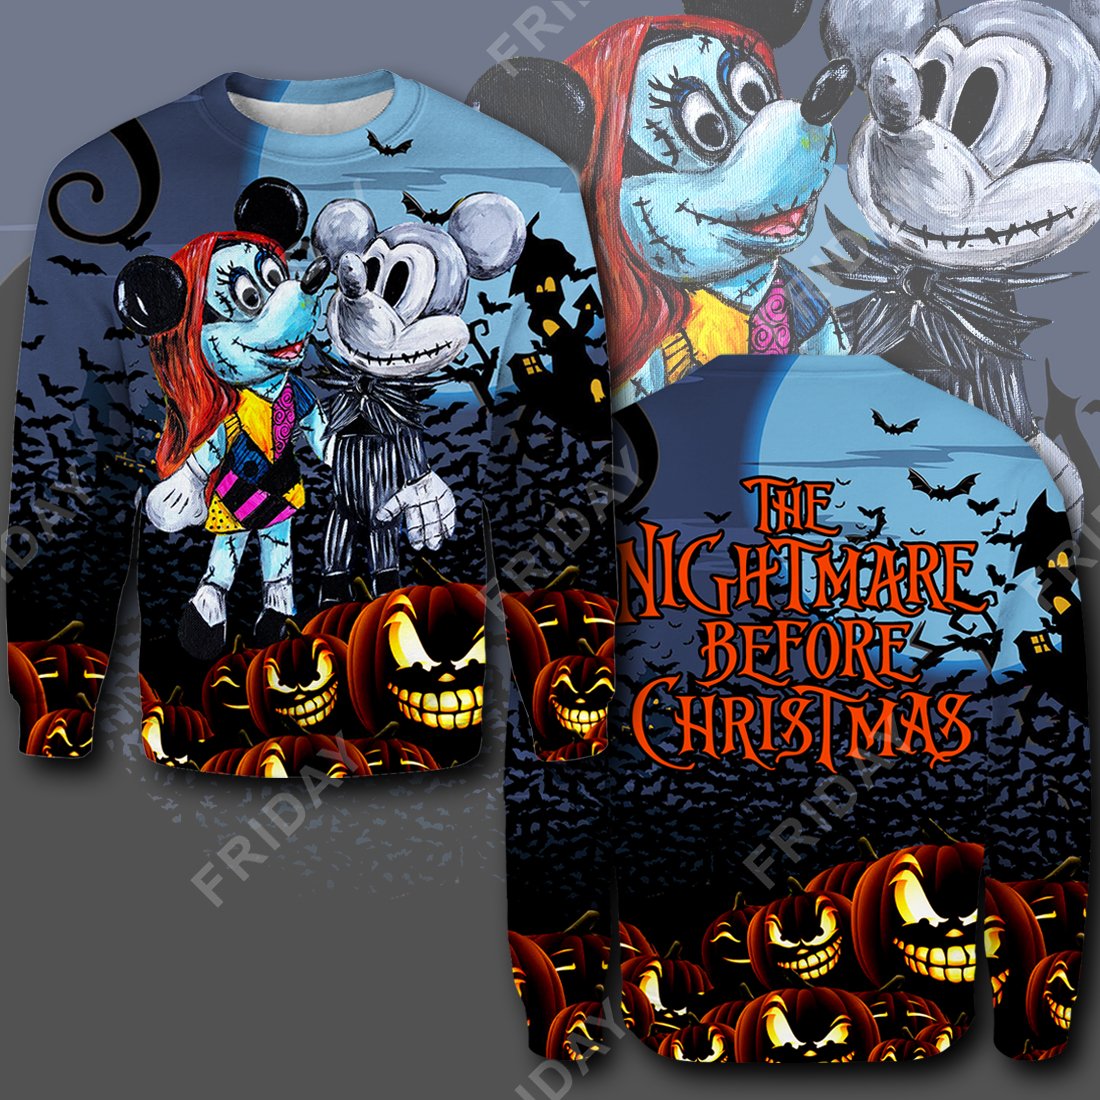 Disney ChristmasT-shirt Mouse Couple Night Of Halloween T-shirt Cool Disney MK Mouse Hoodie Sweater Tank 2022 2907